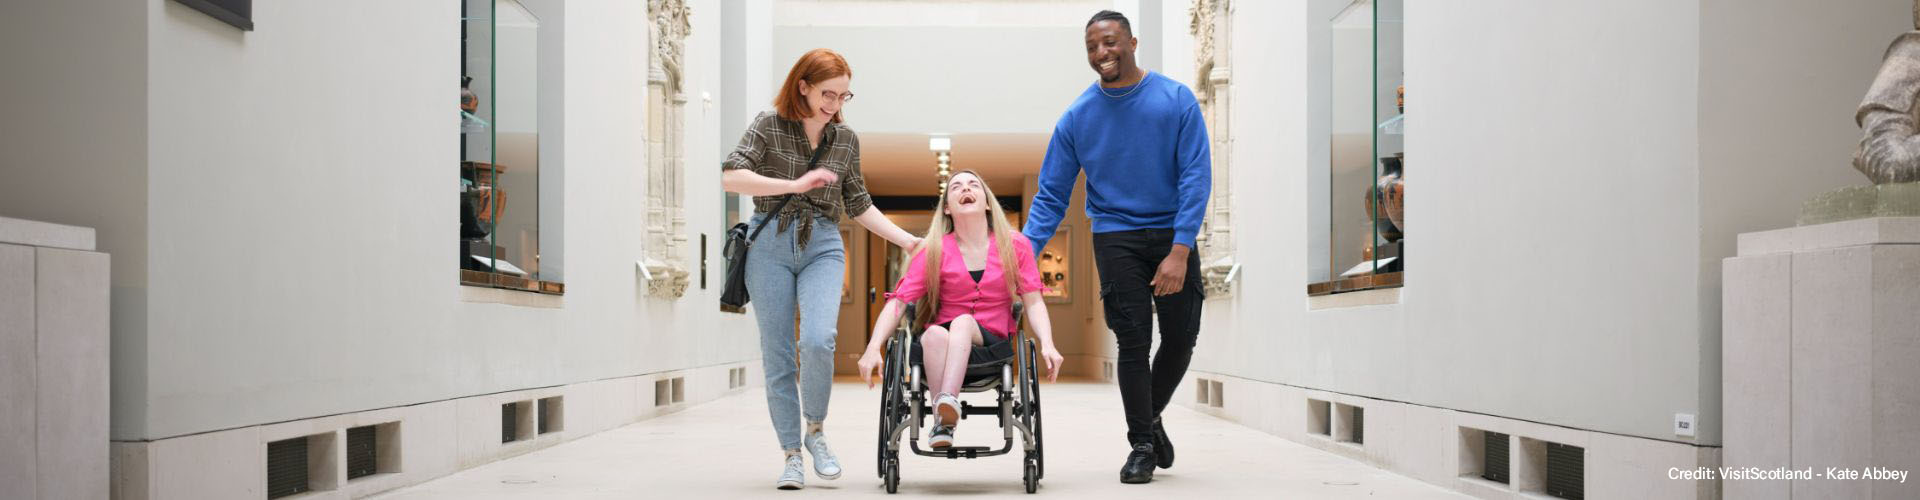 A distanced perspective of three people laughing (one femme wearing a plaid shirt and jeans, one femme in a manual wheelchair wearing a pink blouse and one male wearing a blue jumper and black trousers) inside of a museum.